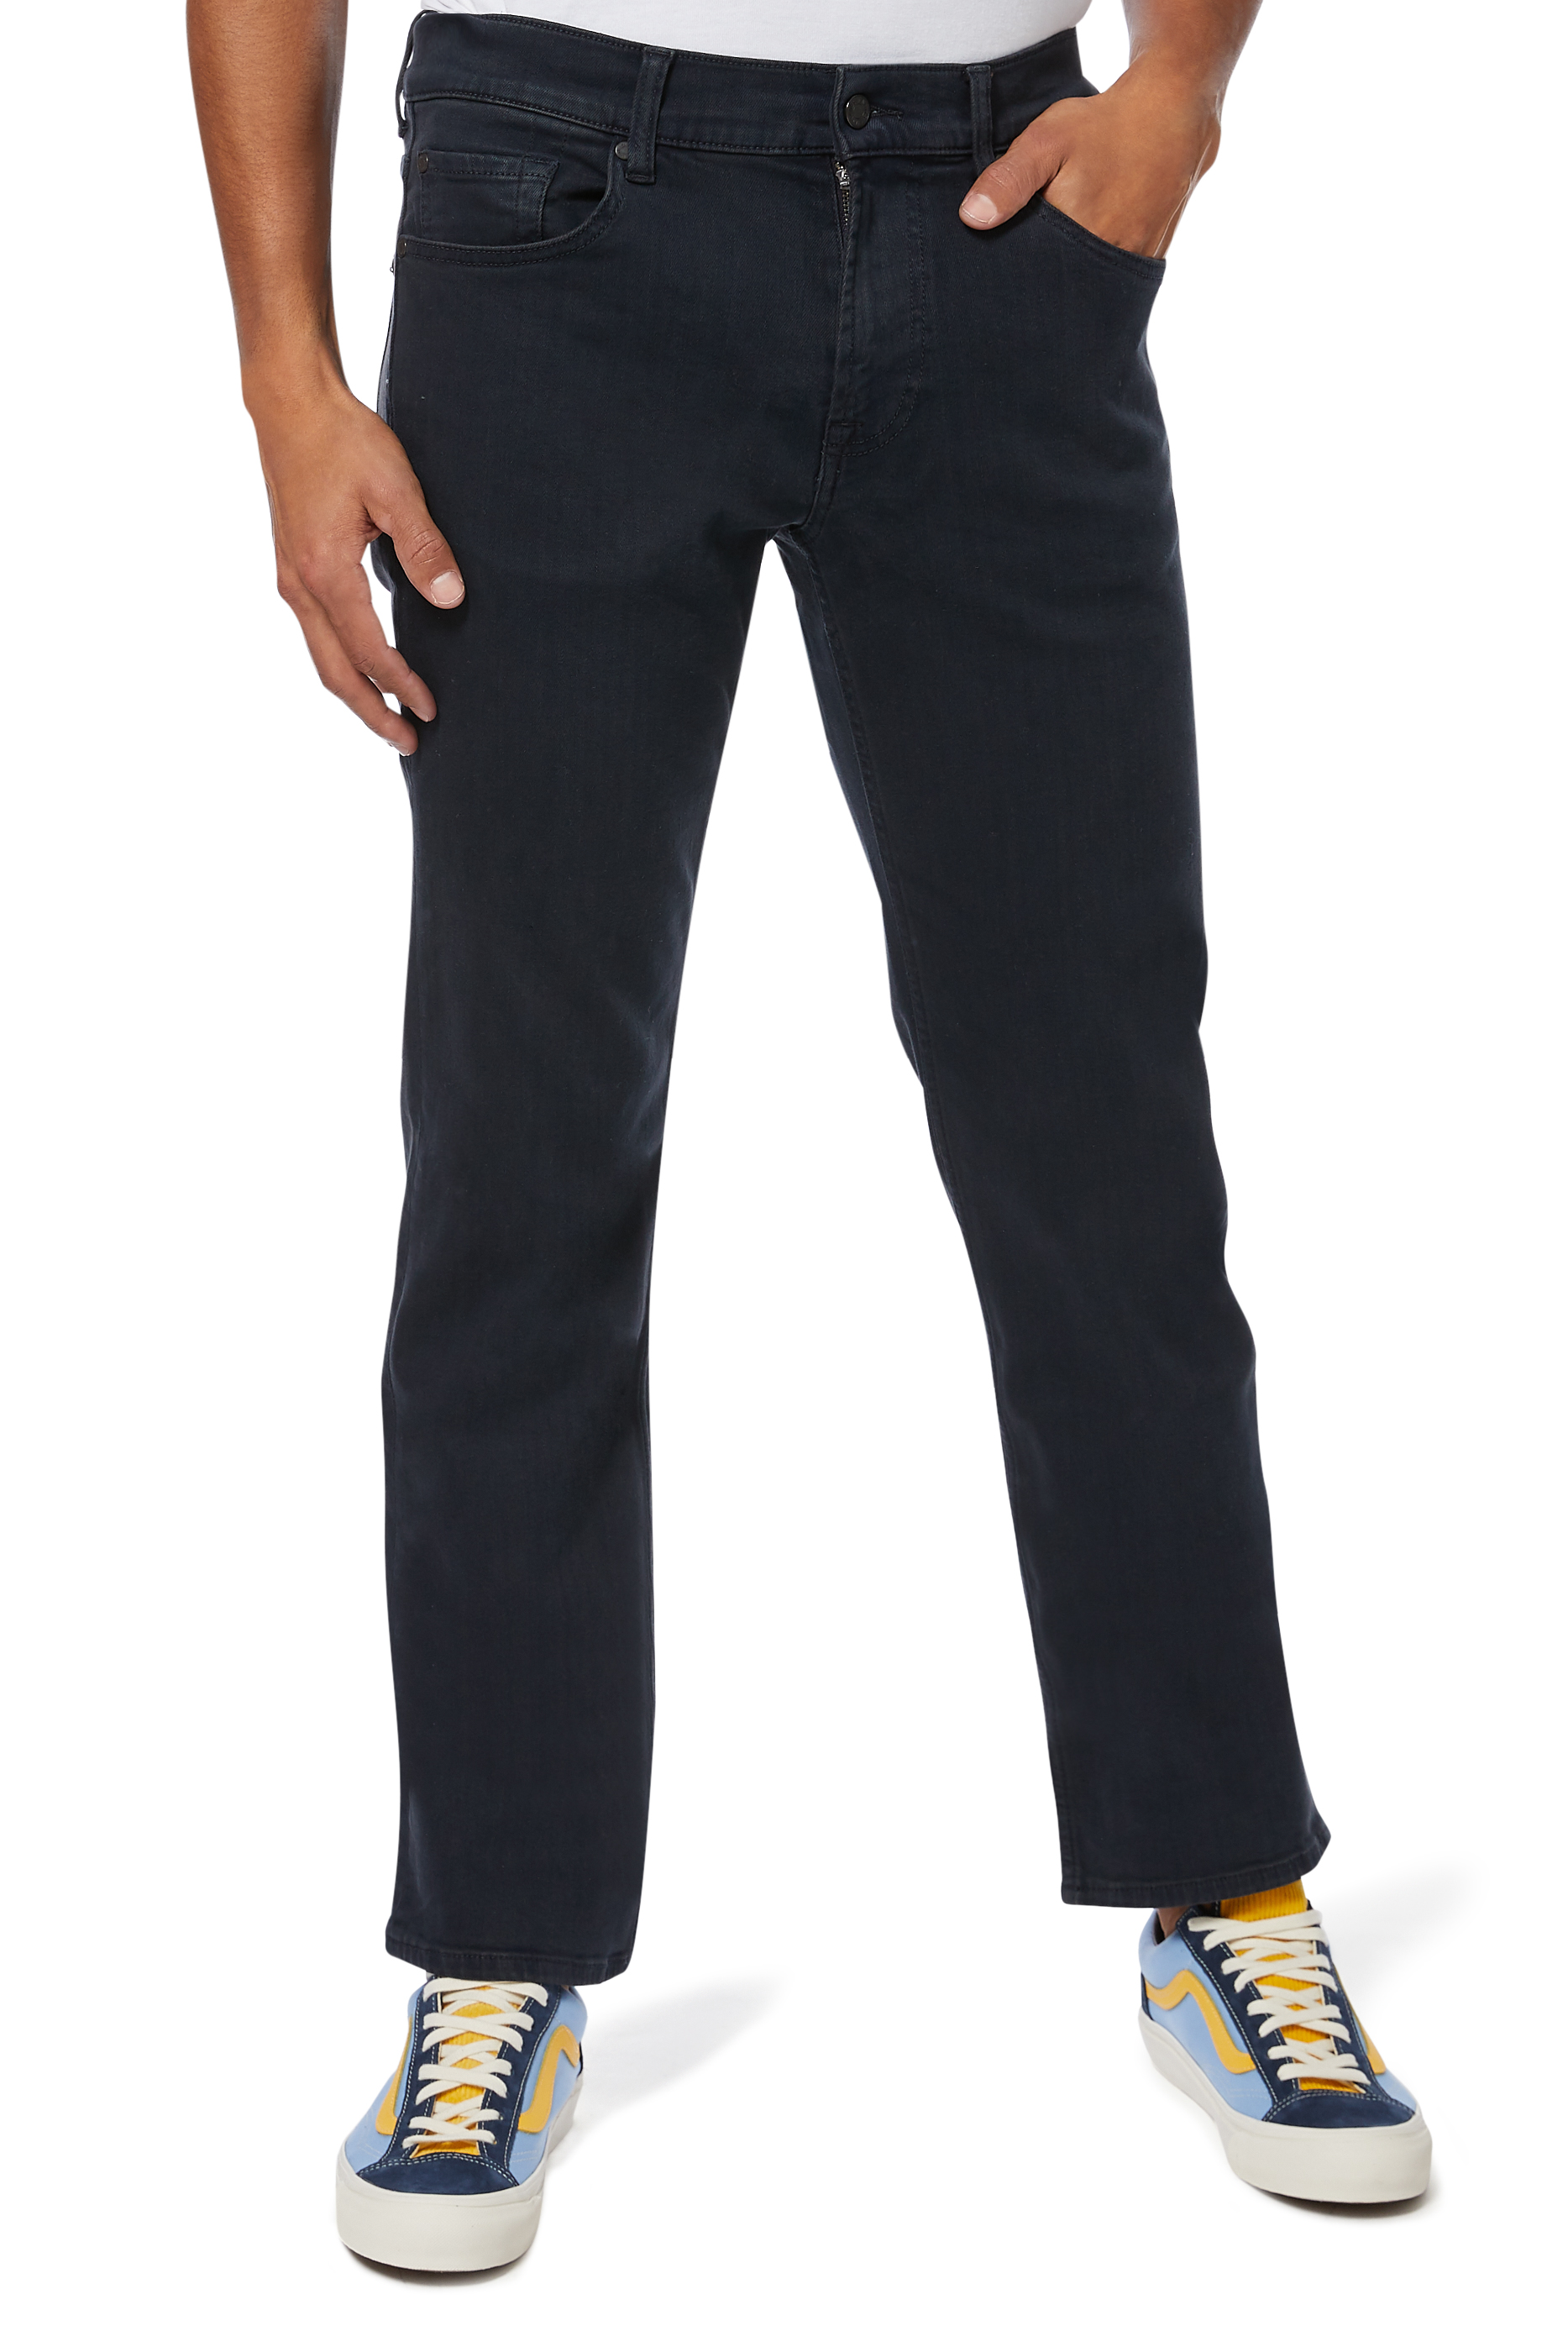 Buy 7 For All Mankind Standard Luxe Performance Jeans for Mens ...